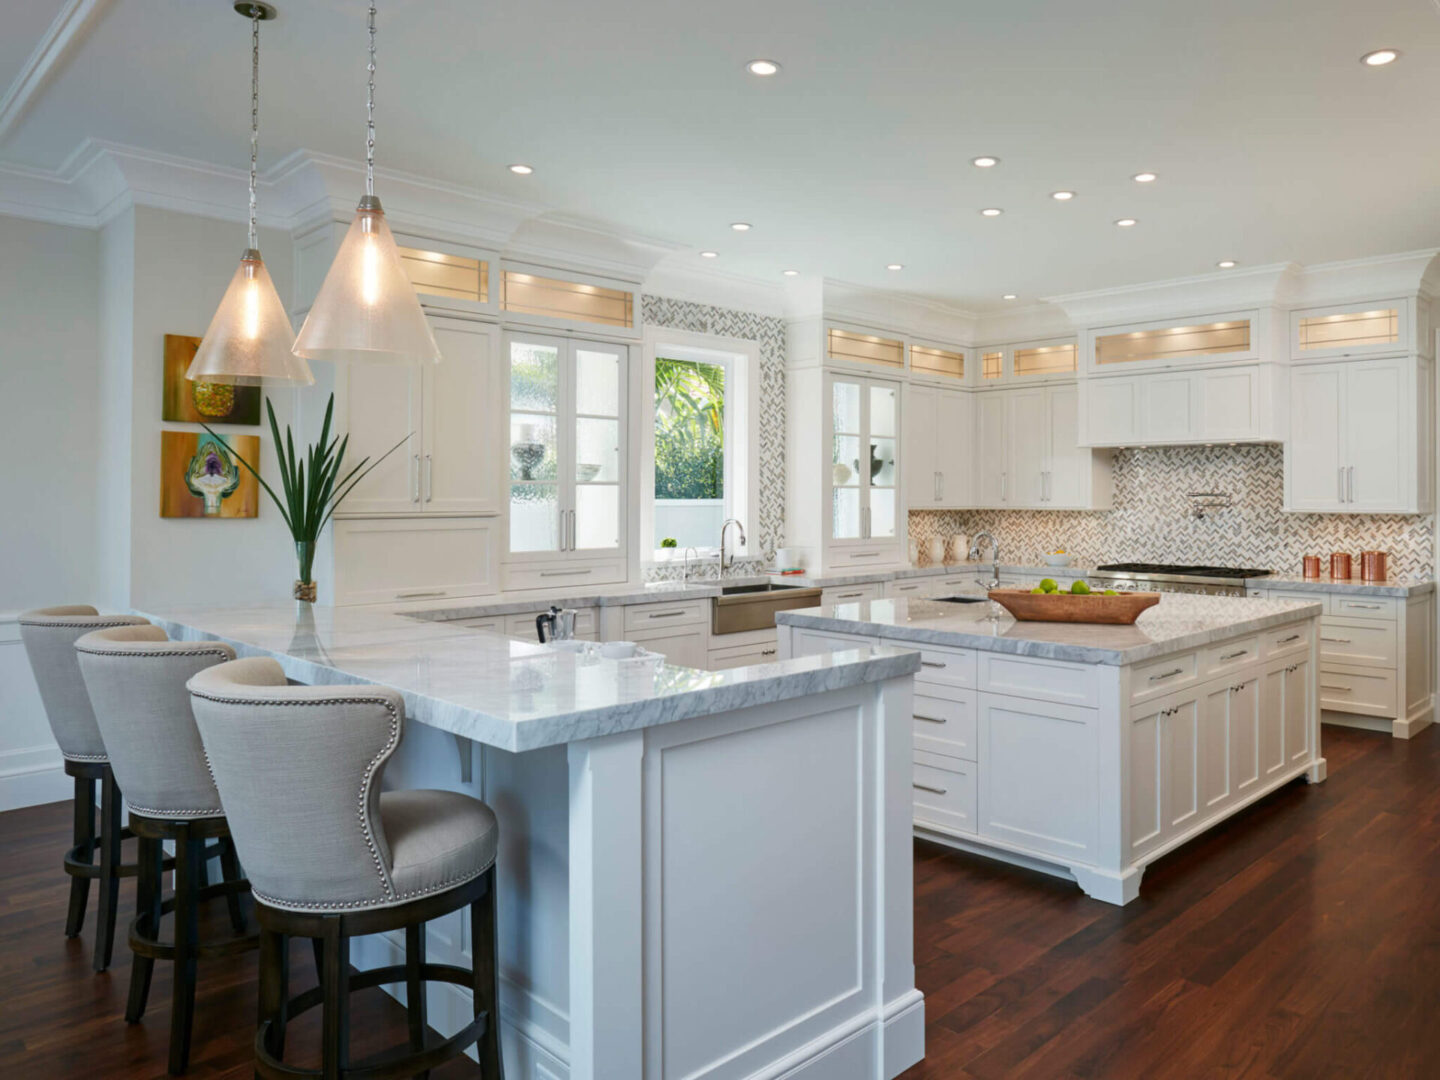 A kitchen with white cabinets and wooden floors